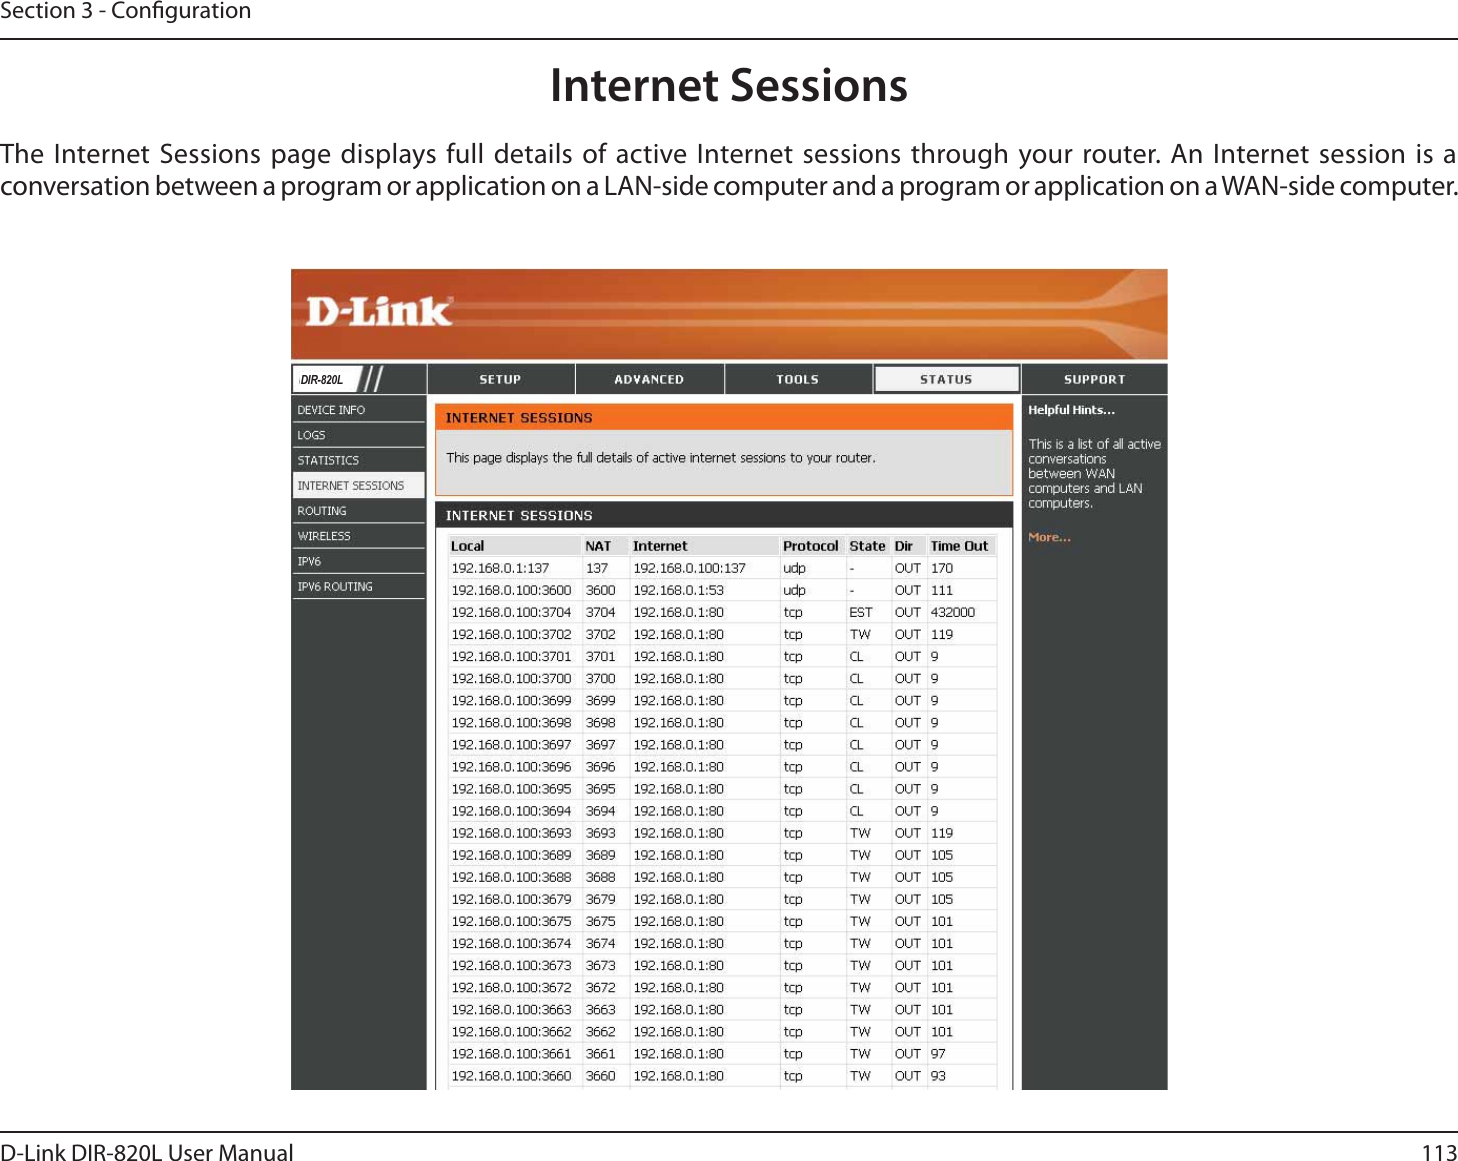 113D-Link DIR-820L User ManualSection 3 - CongurationInternet SessionsThe Internet Sessions page displays full details of active Internet sessions through your router. An Internet session is a conversation between a program or application on a LAN-side computer and a program or application on a WAN-side computer. &apos;,5/